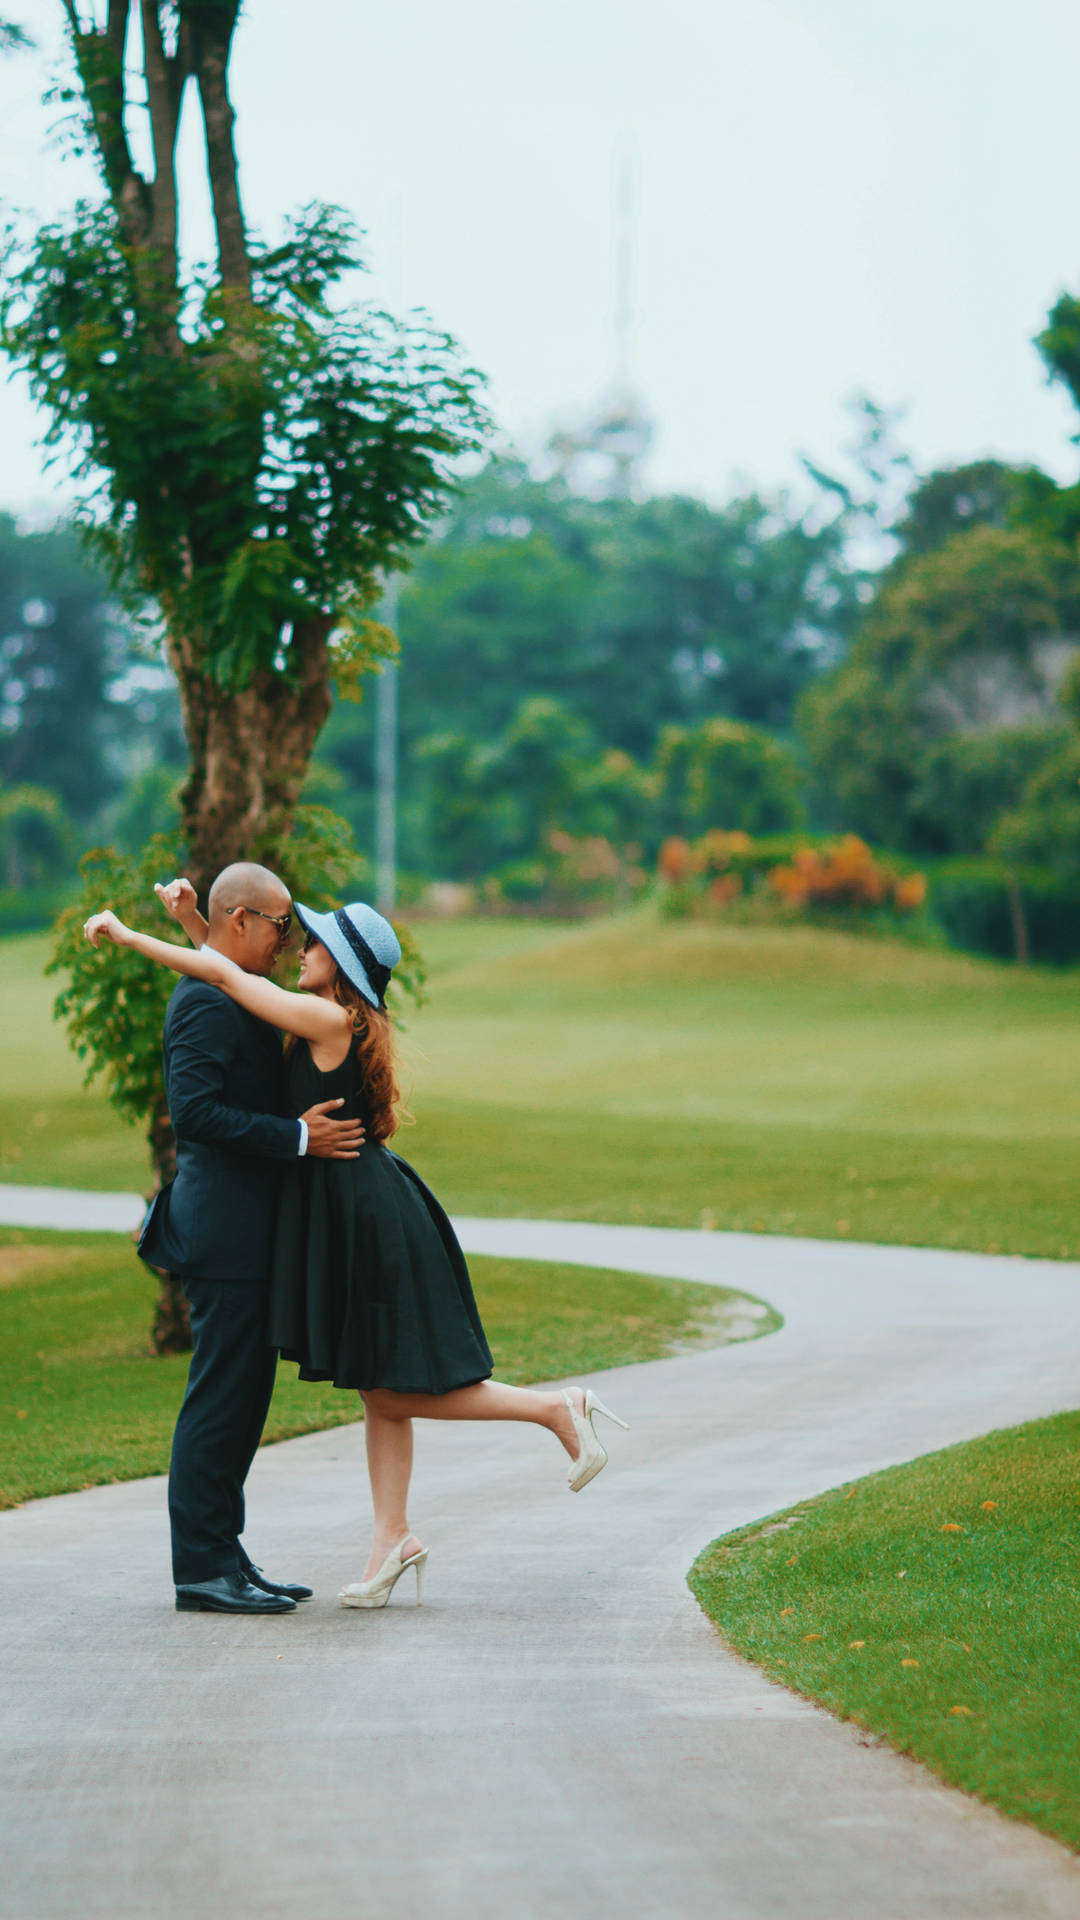 Couple On Golf Course Road Background